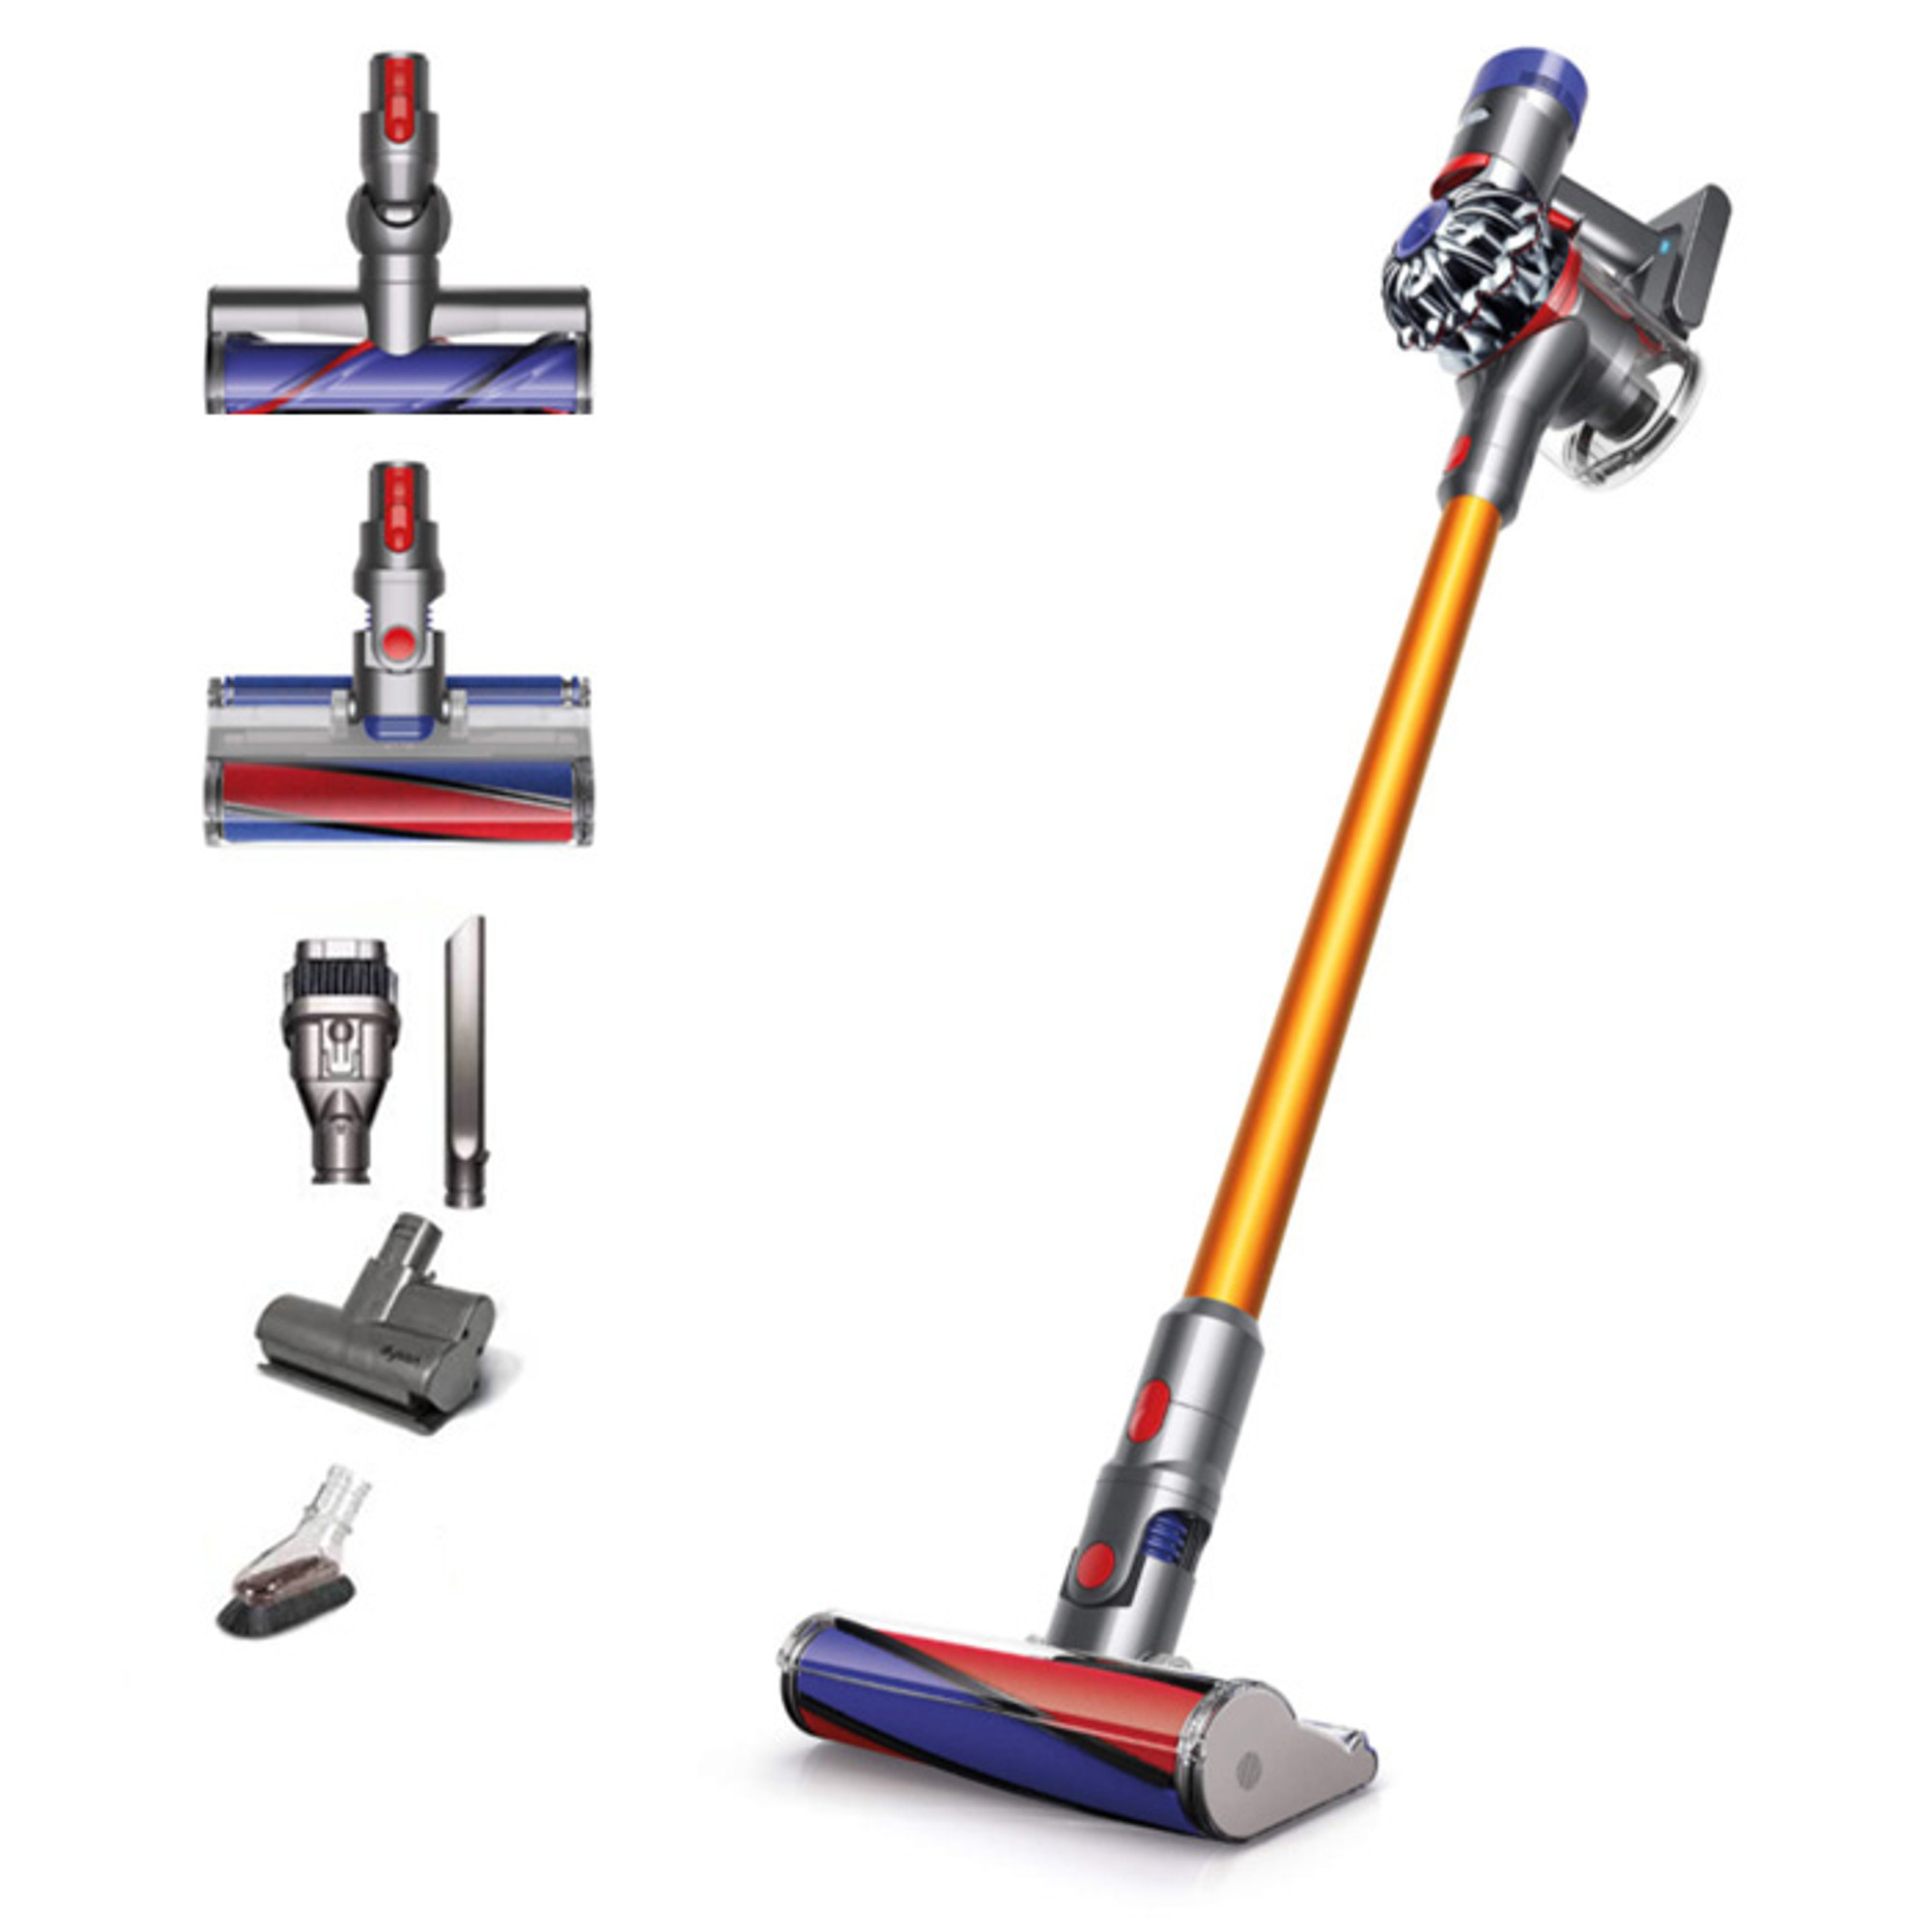 Buy Dyson V8 Absolute Cordless Vacuum from Canada at McHardyVac.com